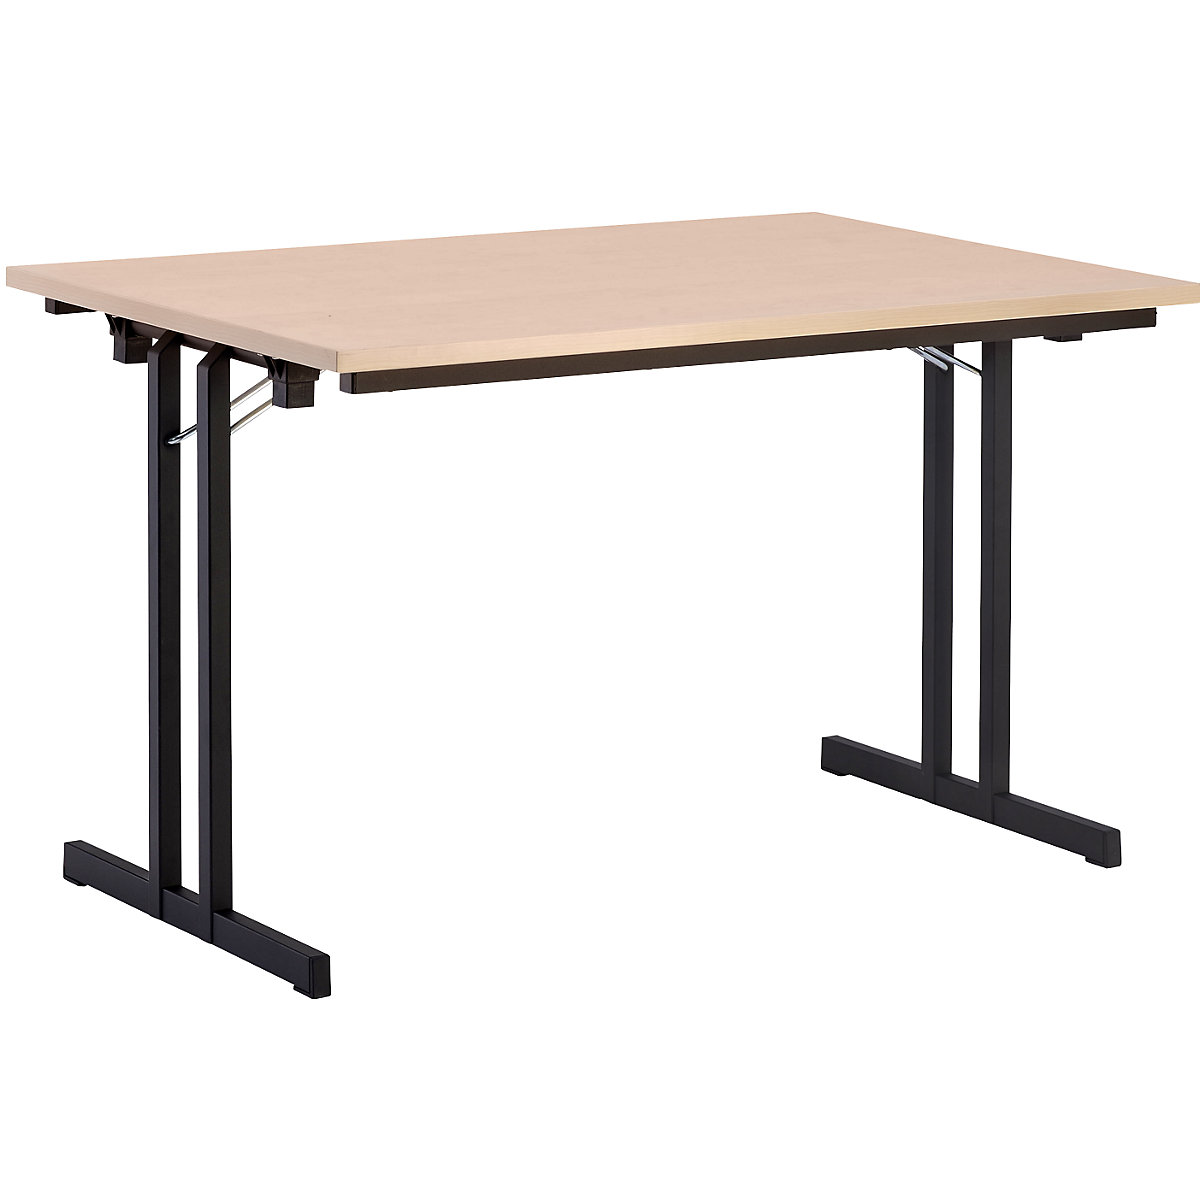 Folding table, with extra thick tabletop, height 720 mm, 1200 x 800 mm, black frame, maple finish tabletop-7